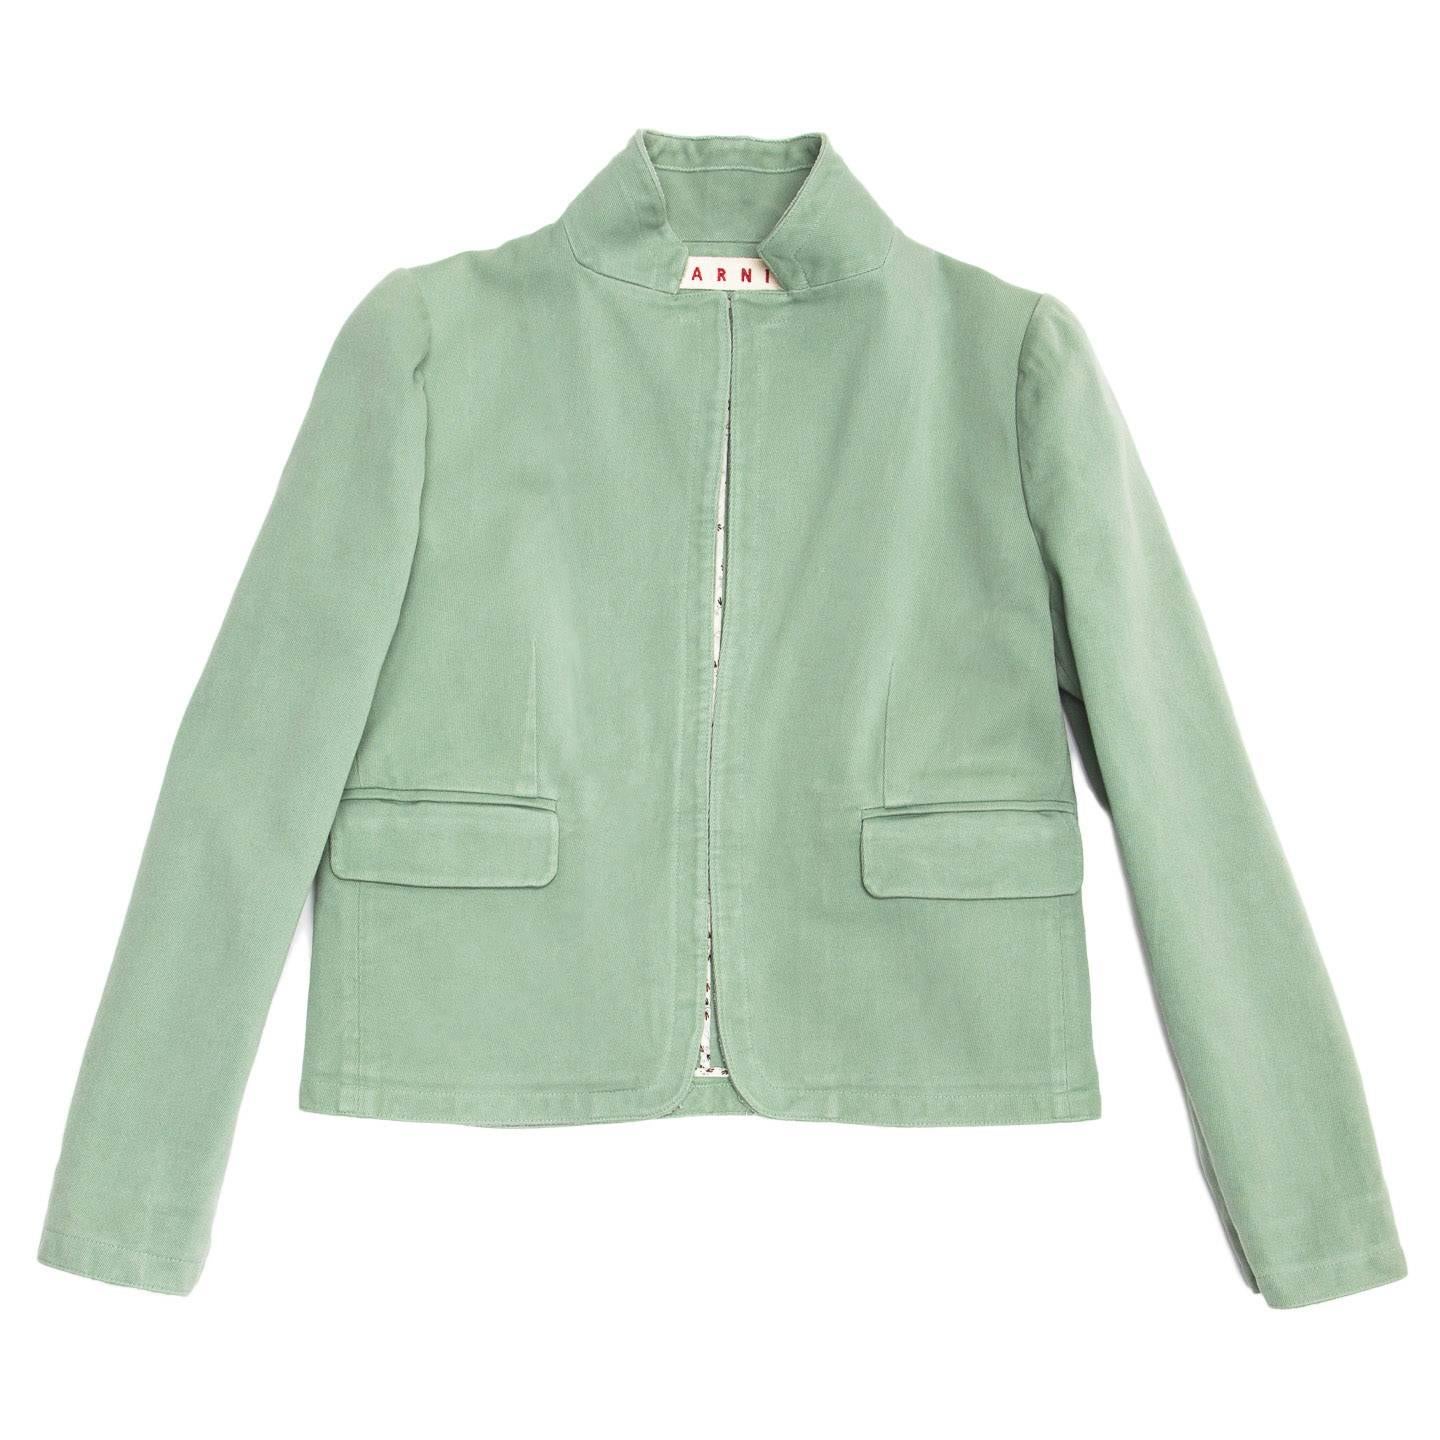 Moss green cotton jacket with free open front and a small lapel adorned with a raw edge self-fabric tape applique. Two flap pockets sit at waist and all the inner seams are covered with white and brown floral binding.

Size  44 Italian